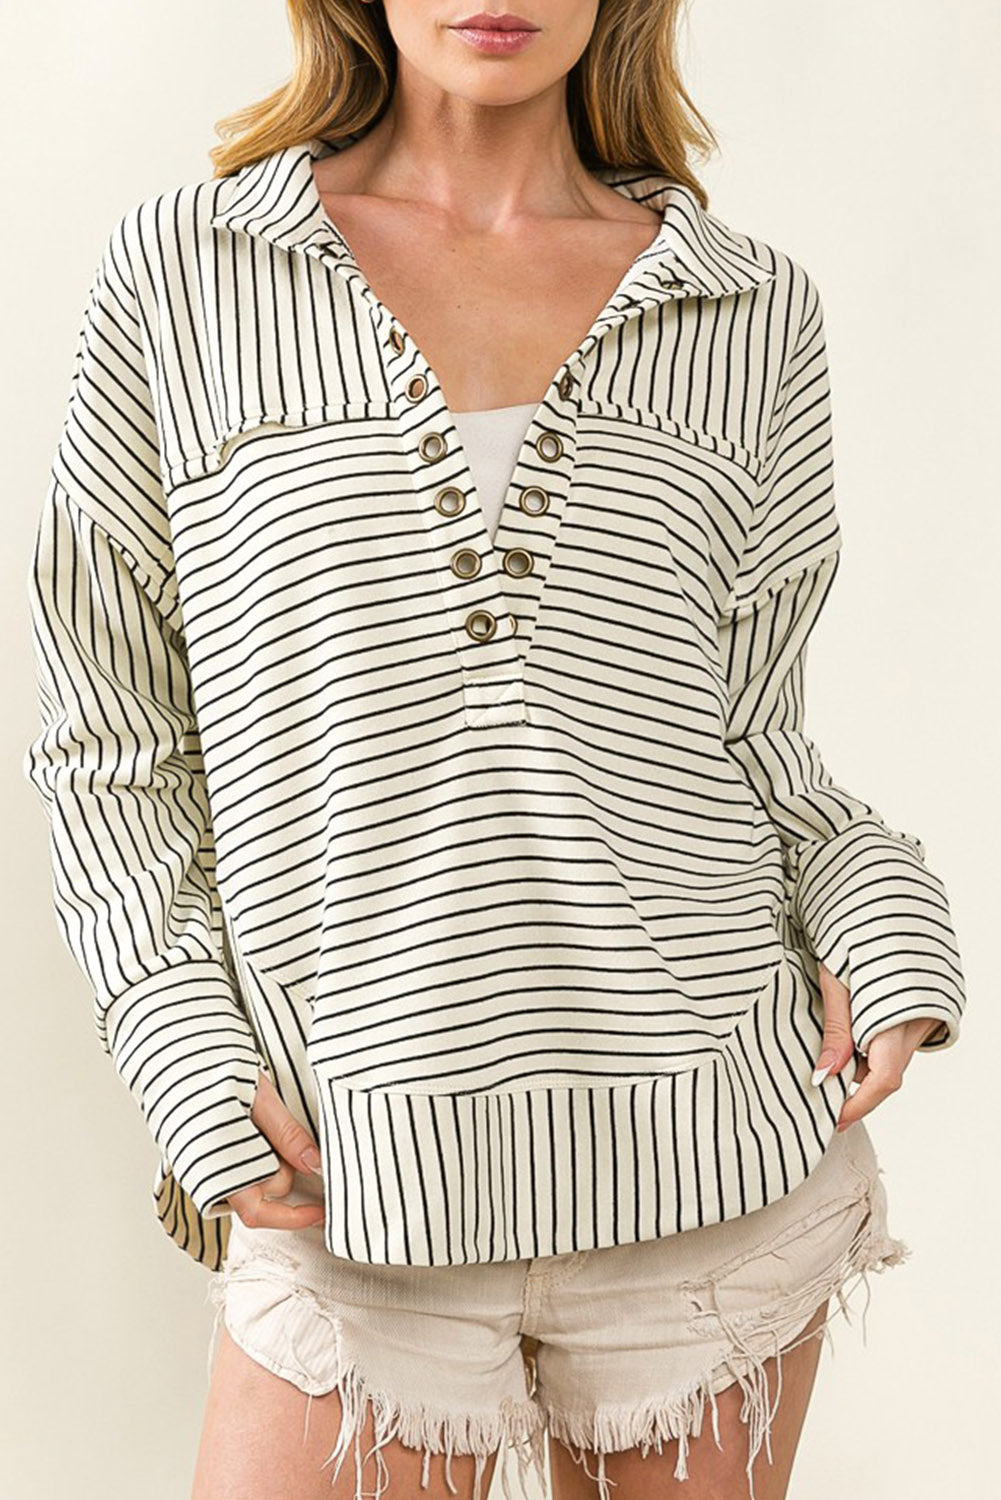 Autumn Striped Printed Long Sleeved Top Women Casual Pullover V neck Sweater Women Clothing